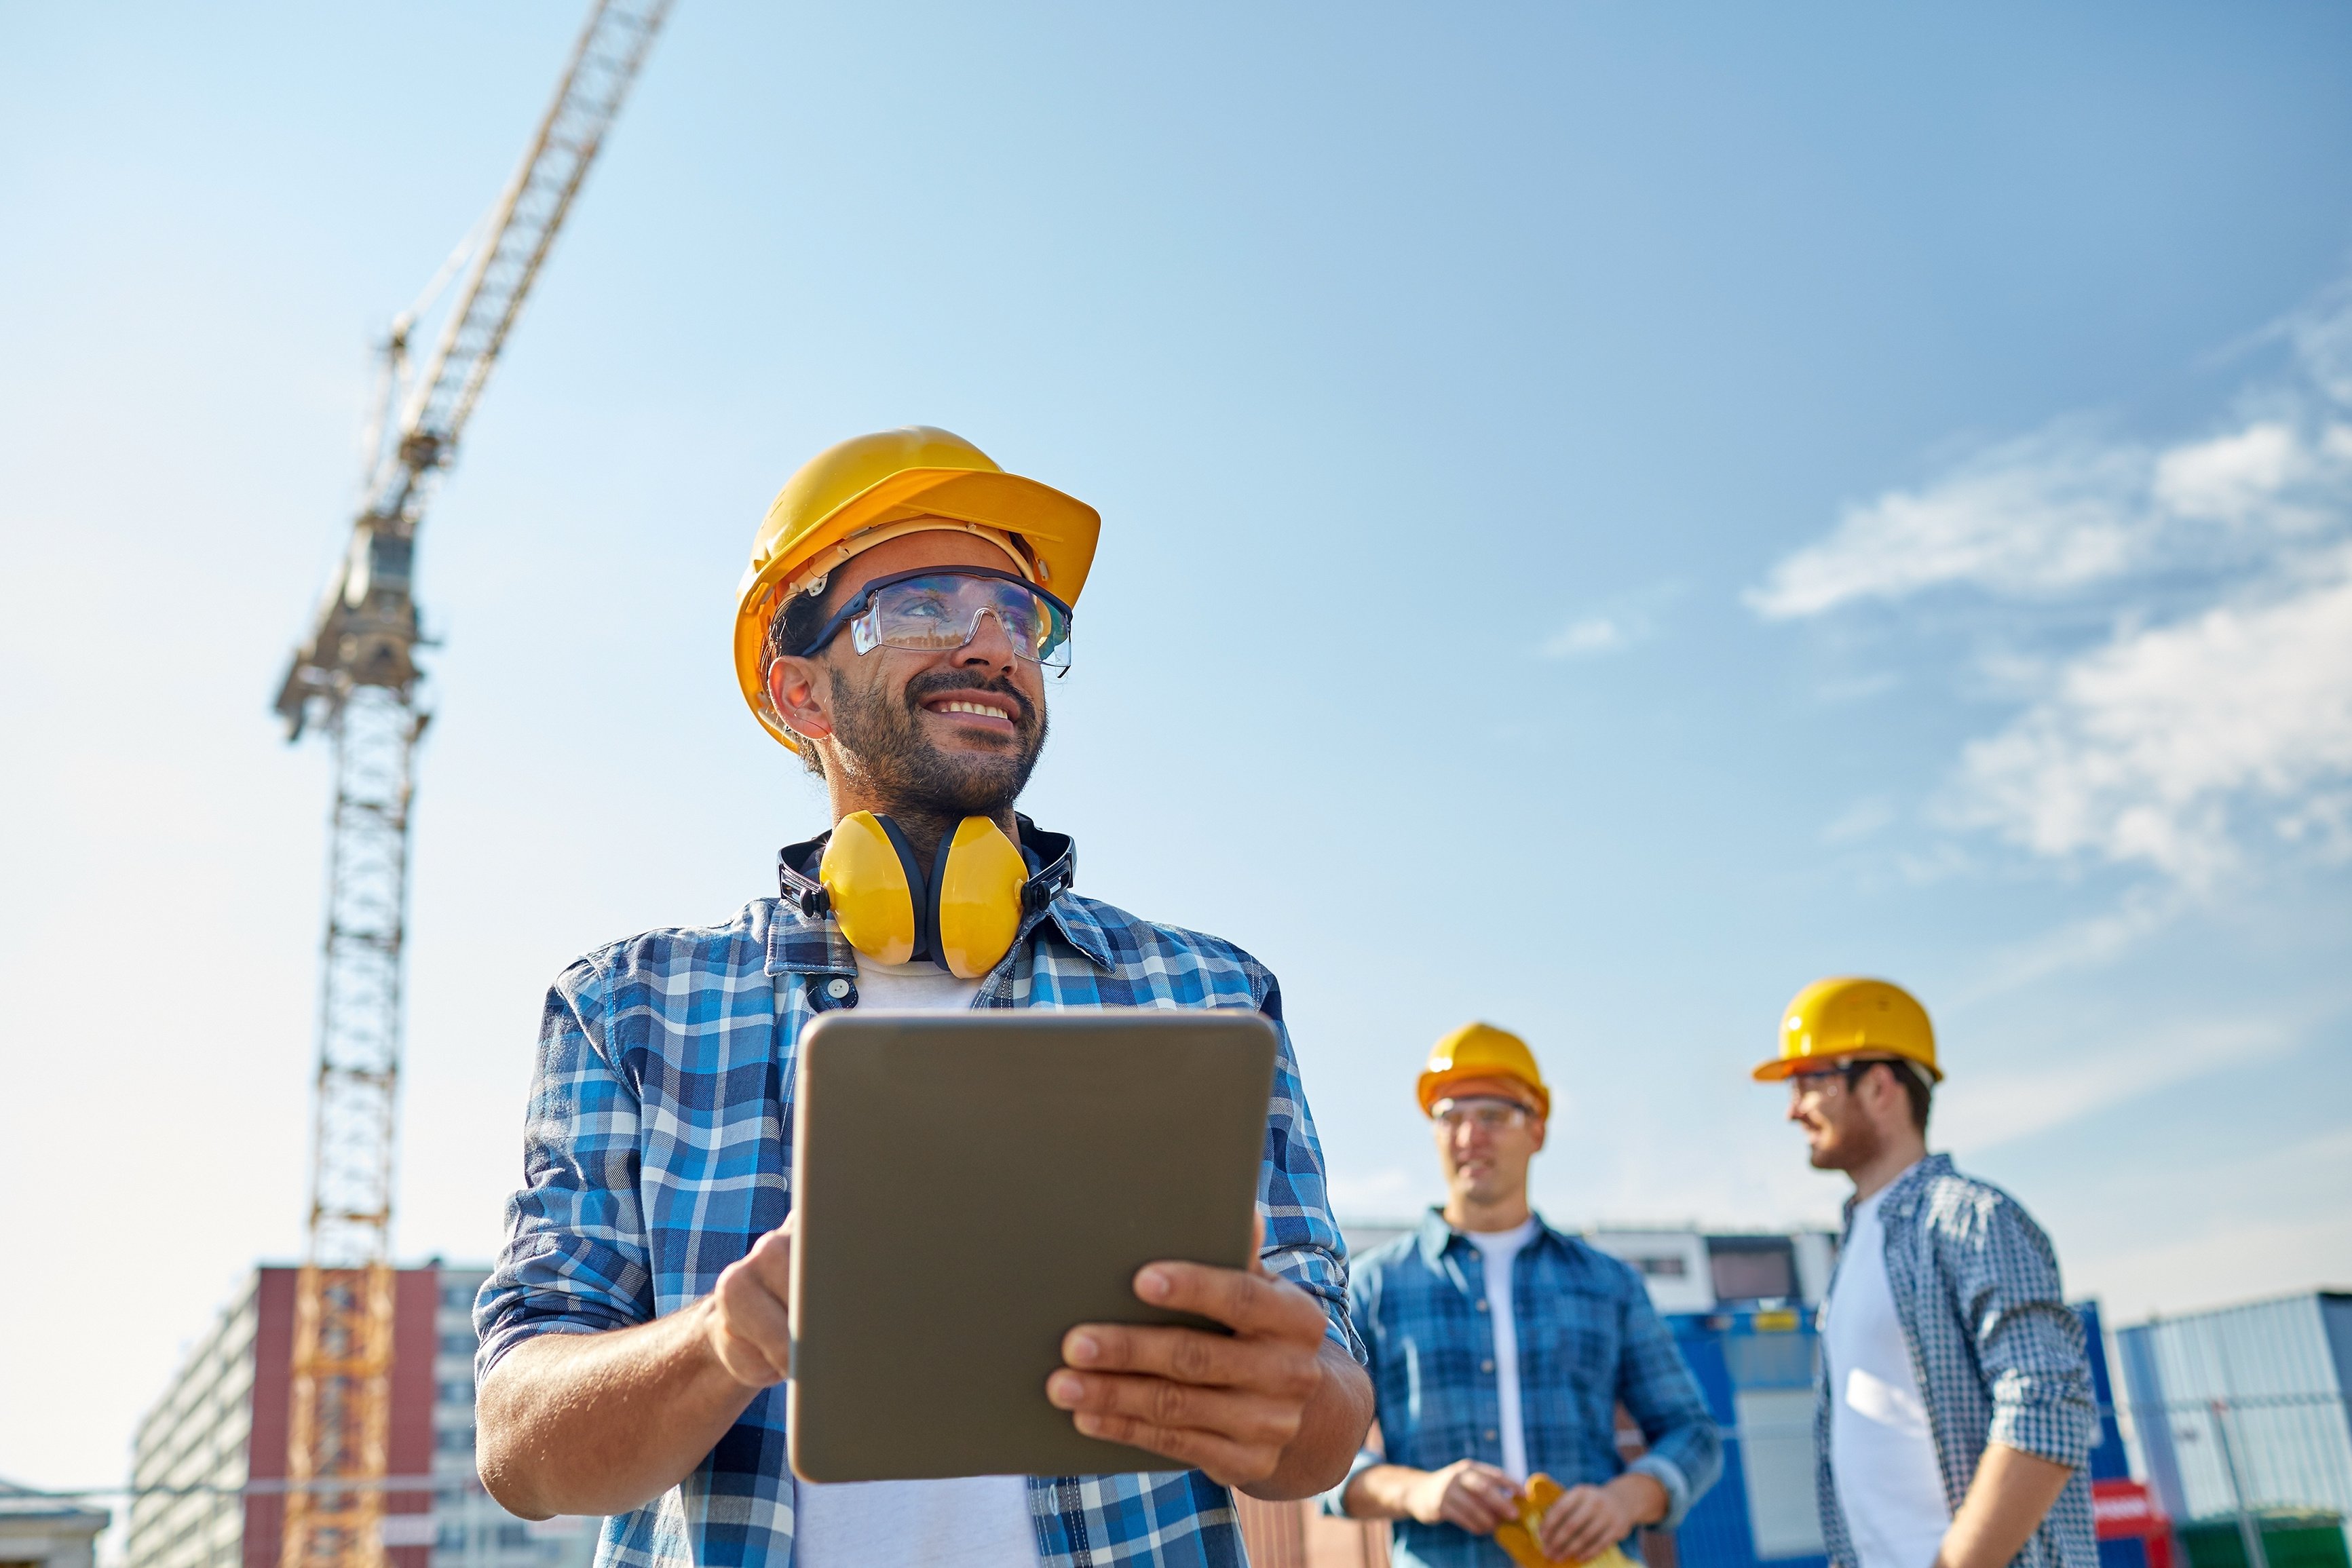 Construction worker smiles while holding iPad on construction site